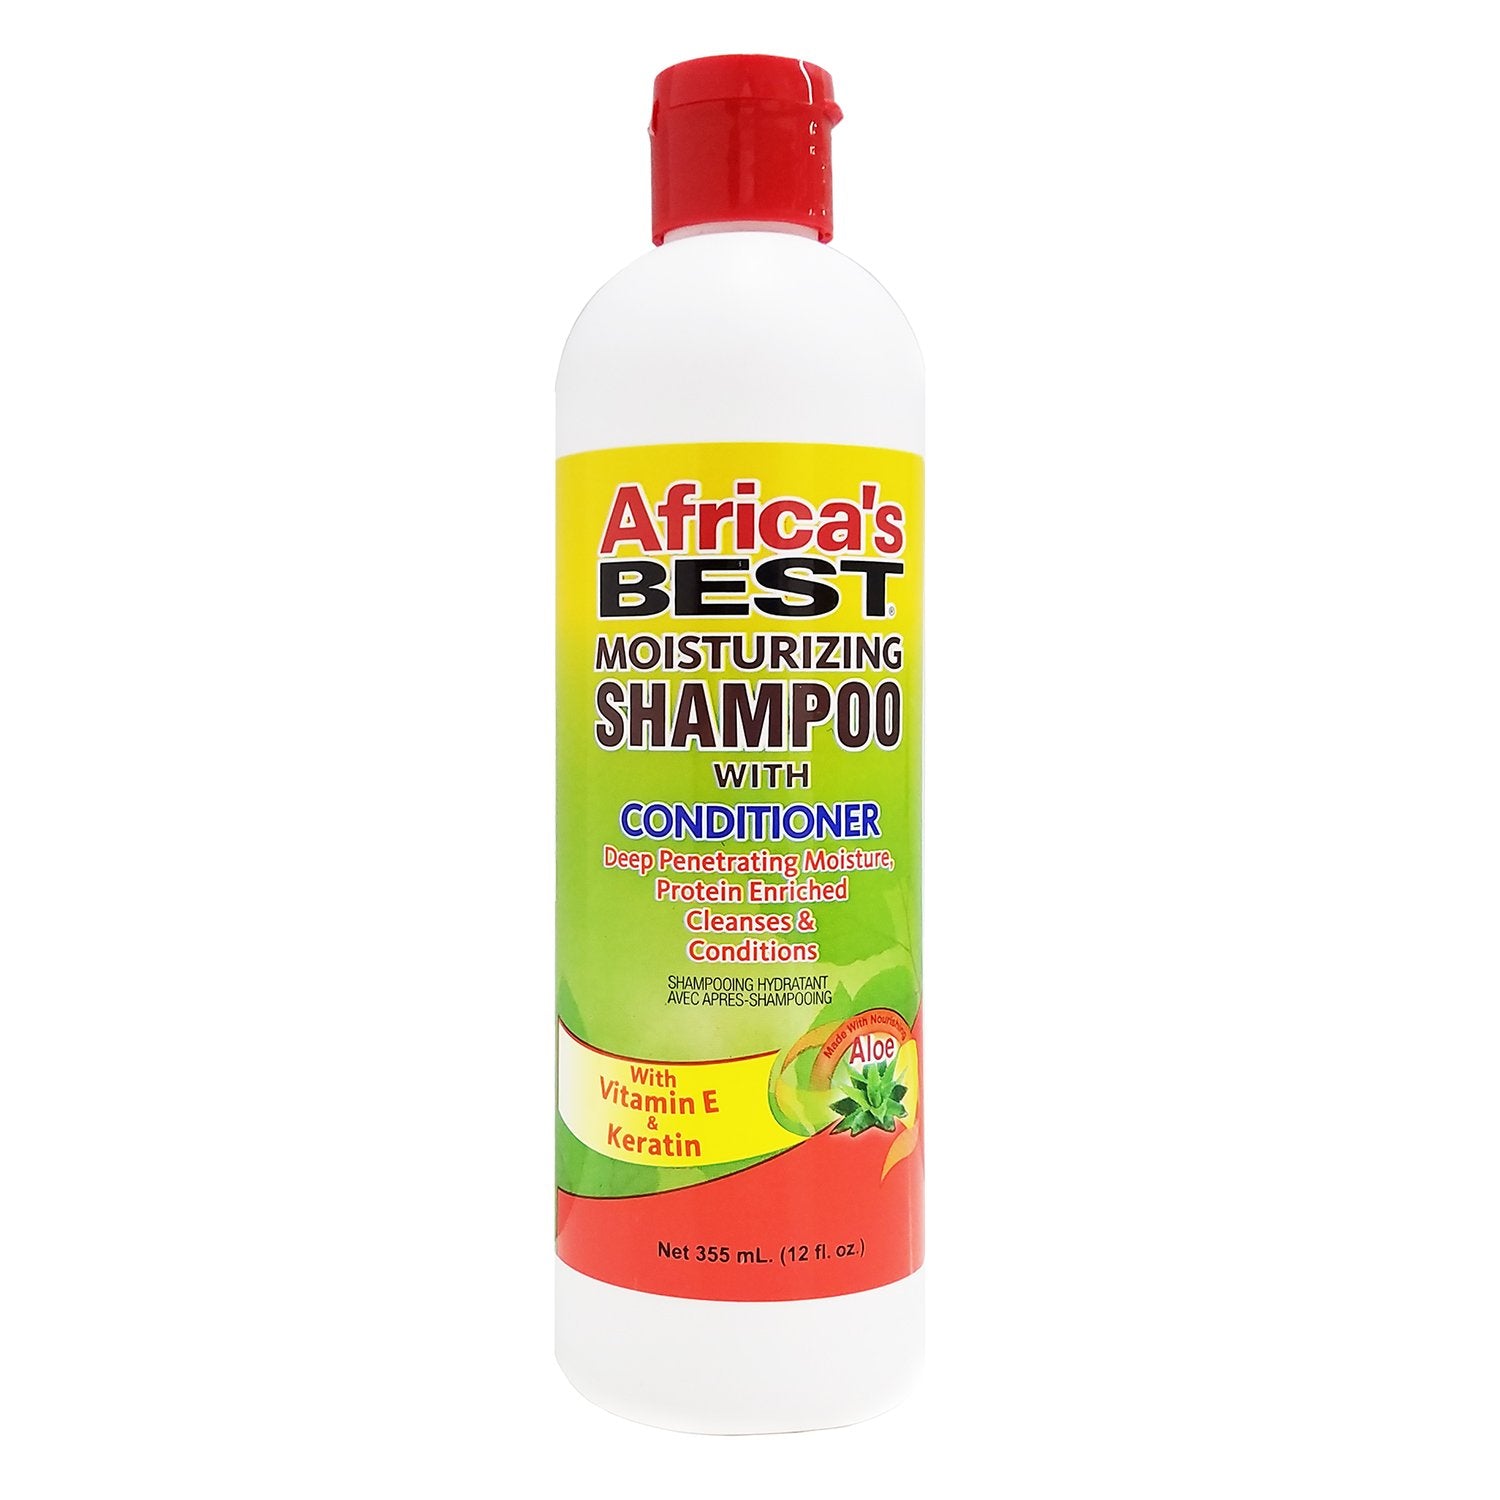 snemand paritet overfladisk AFRICA'S BEST MOISTURIZING SHAMPOO WITH CONDITIONER- 12OZ – Curly Gurl Luv  Beauty Supply